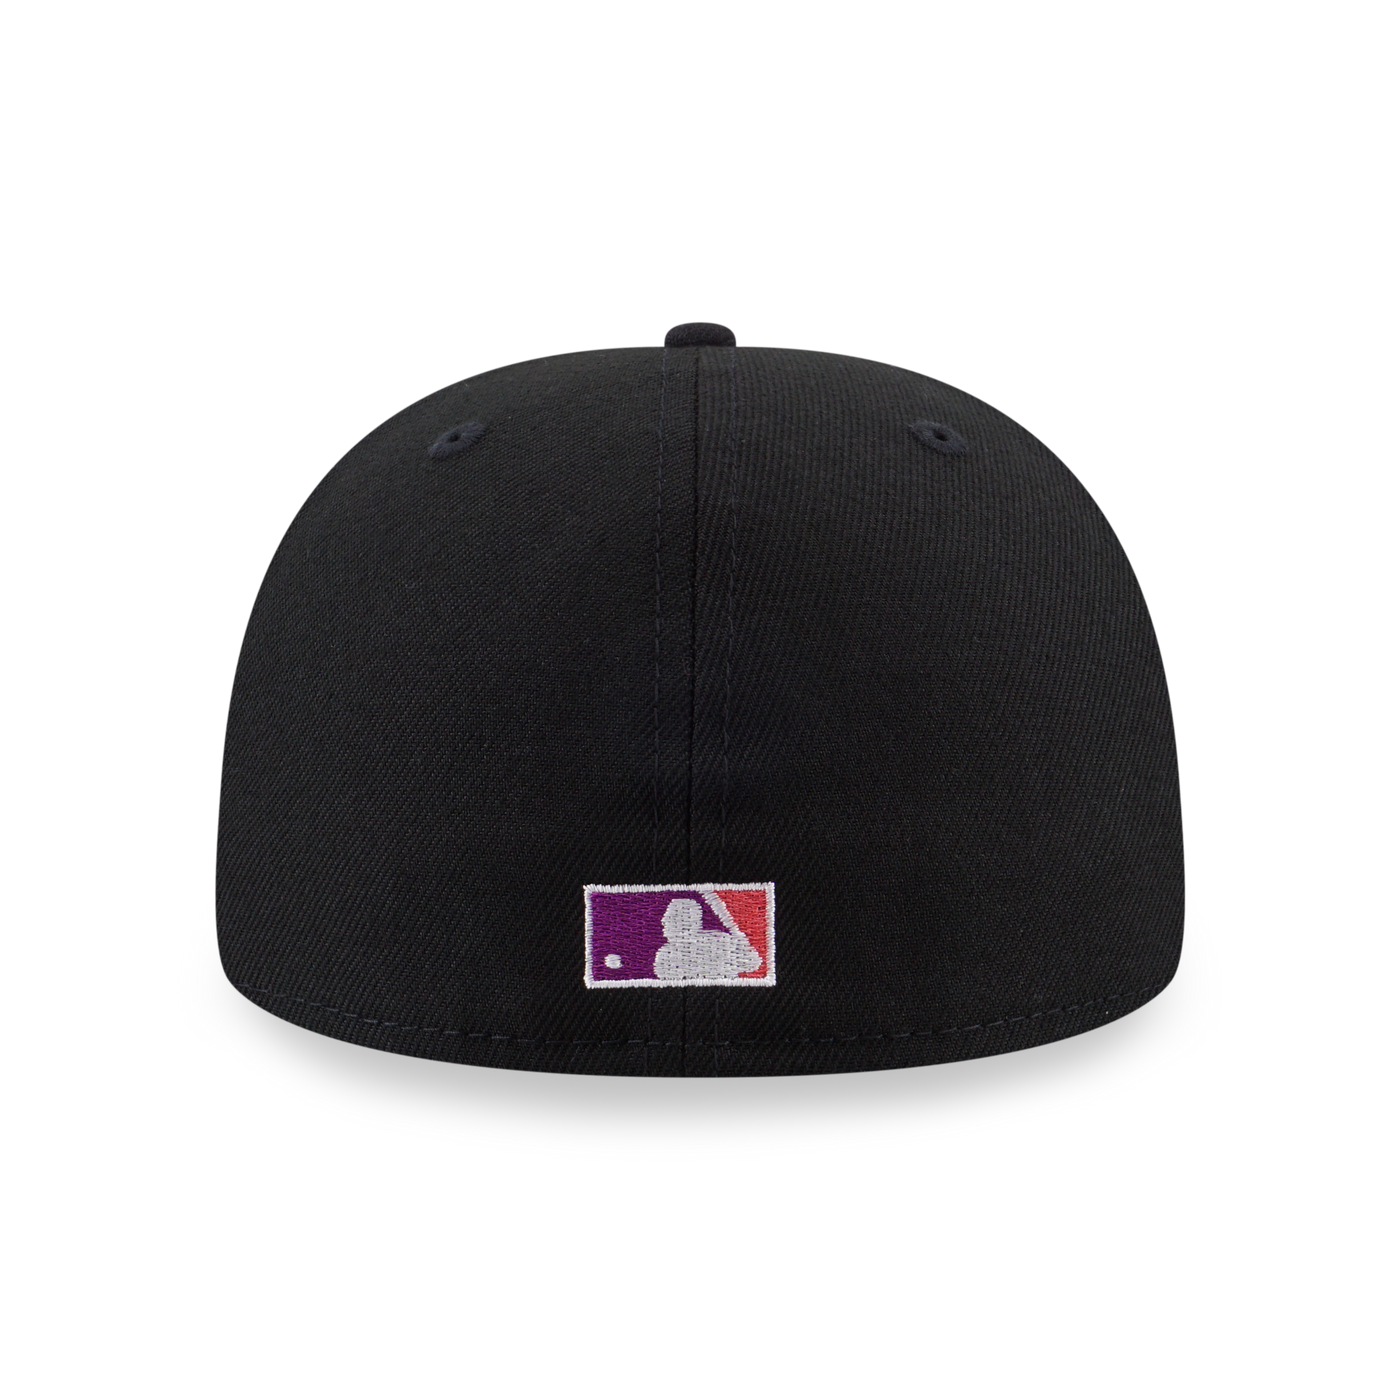 59FIFTY PACK - HALLOWEEN NEW YORK METS BLACK 59FIFTY CAP